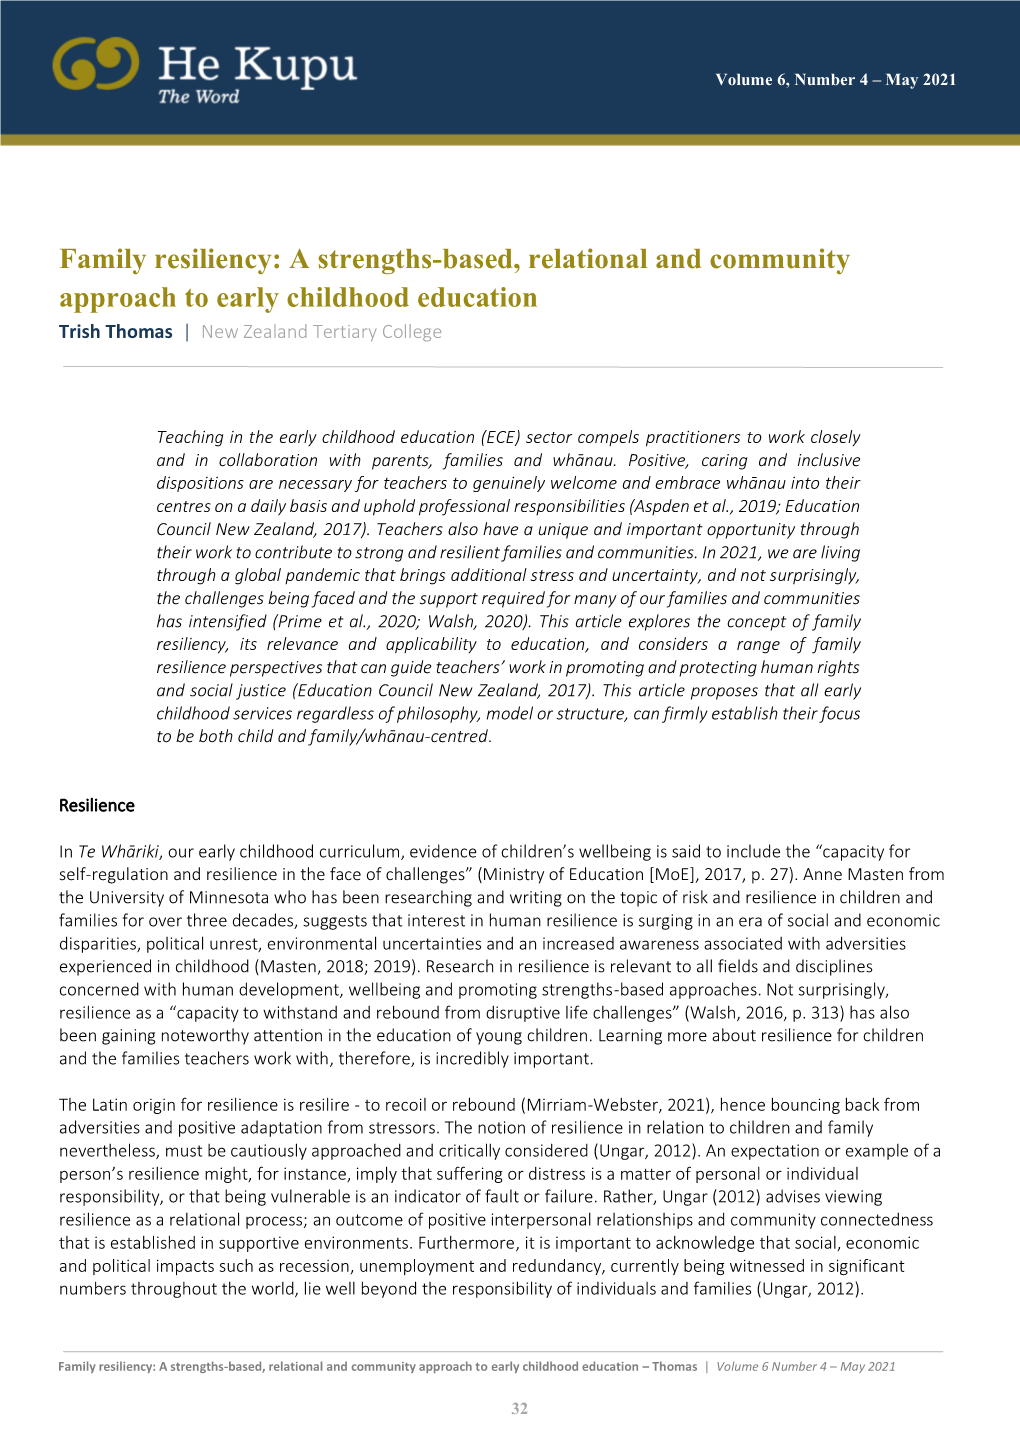 Family Resiliency: a Strengths-Based, Relational and Community Approach to Early Childhood Education Trish Thomas | New Zealand Tertiary College